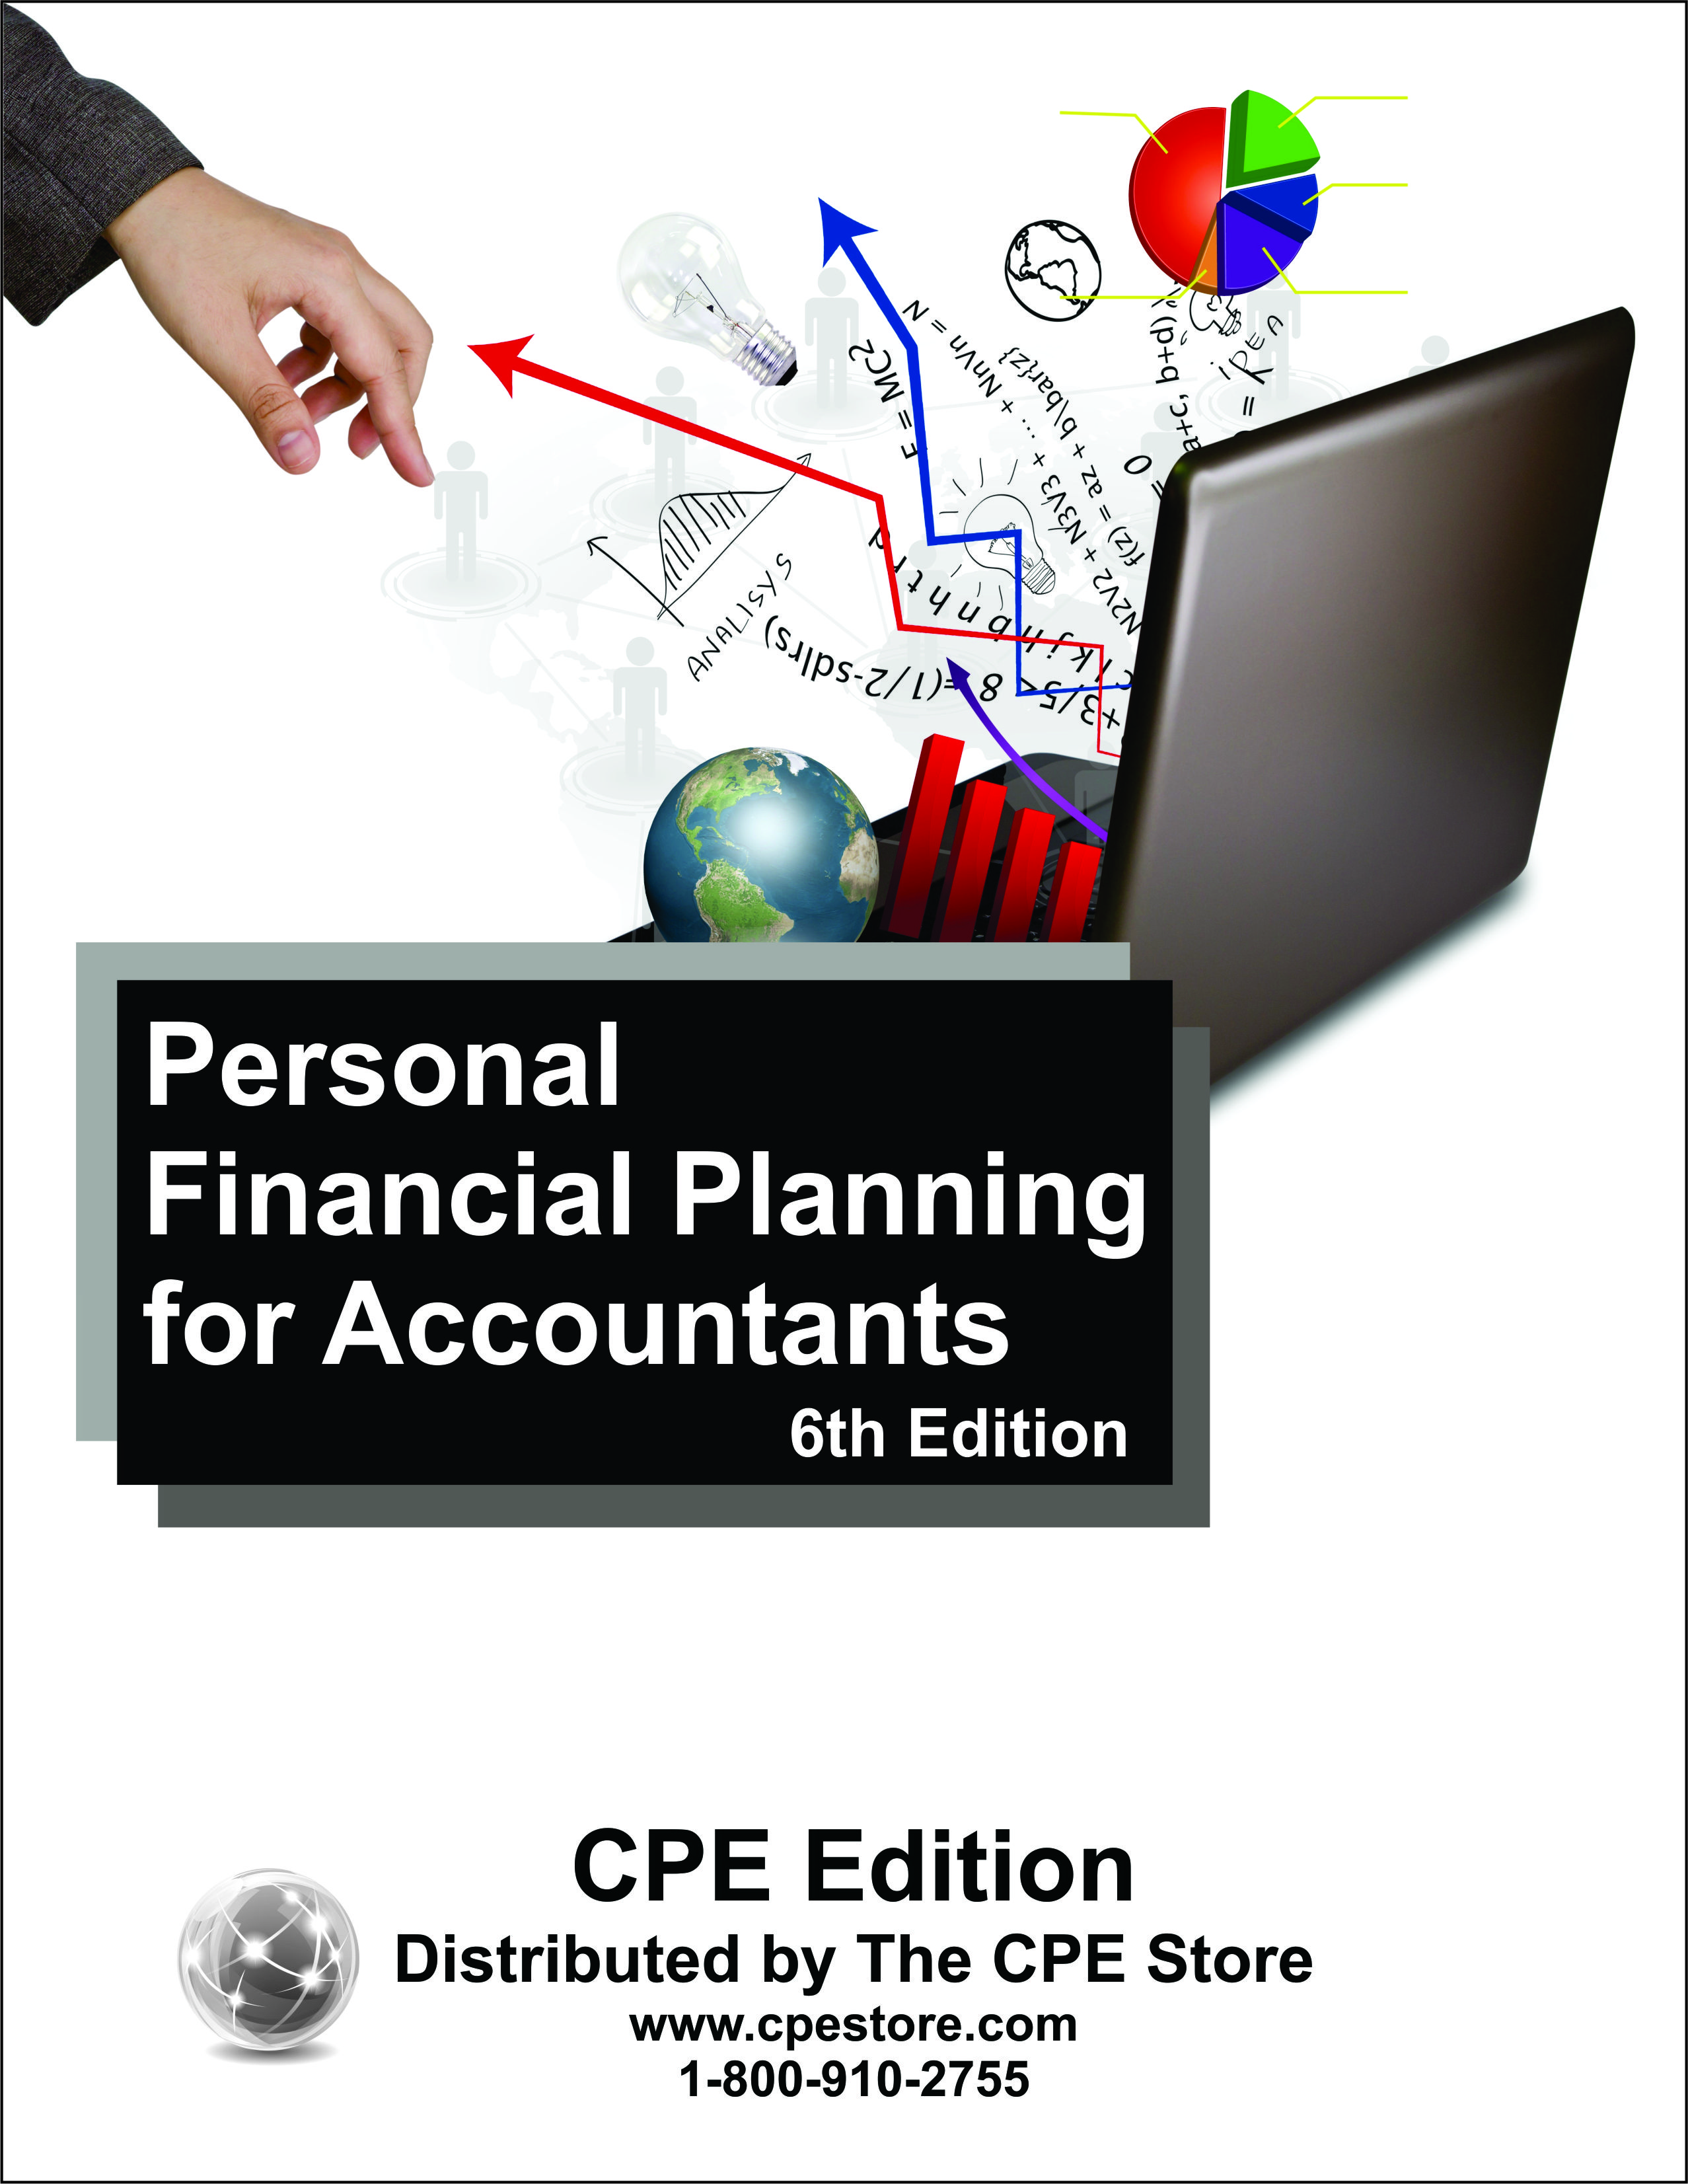 Personal Financial Planning for Accountants